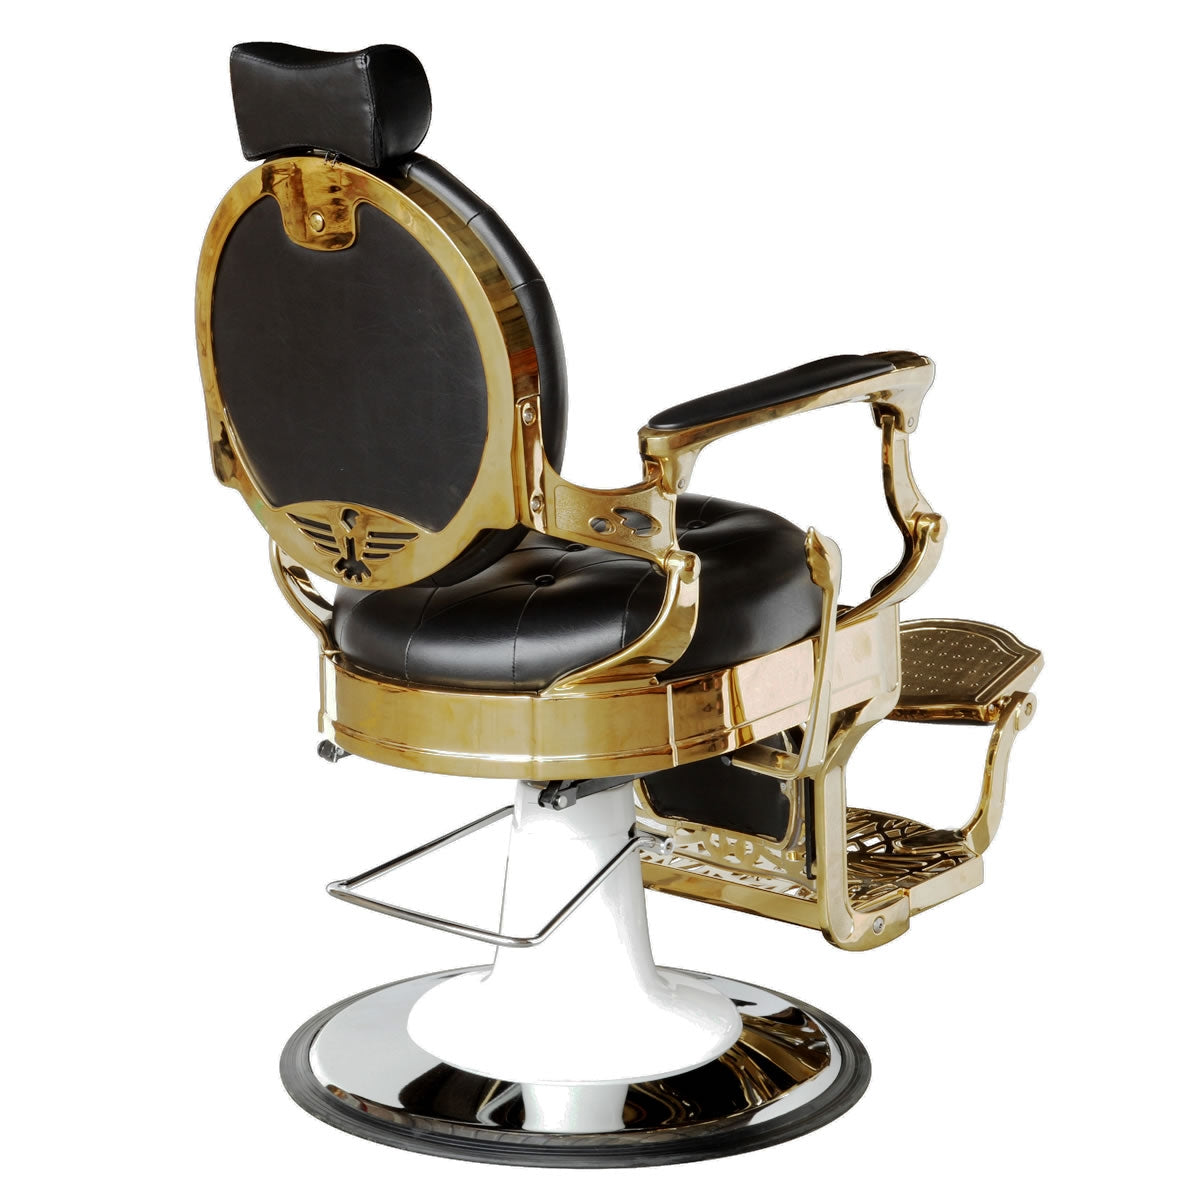 THEODORE Barber Chair